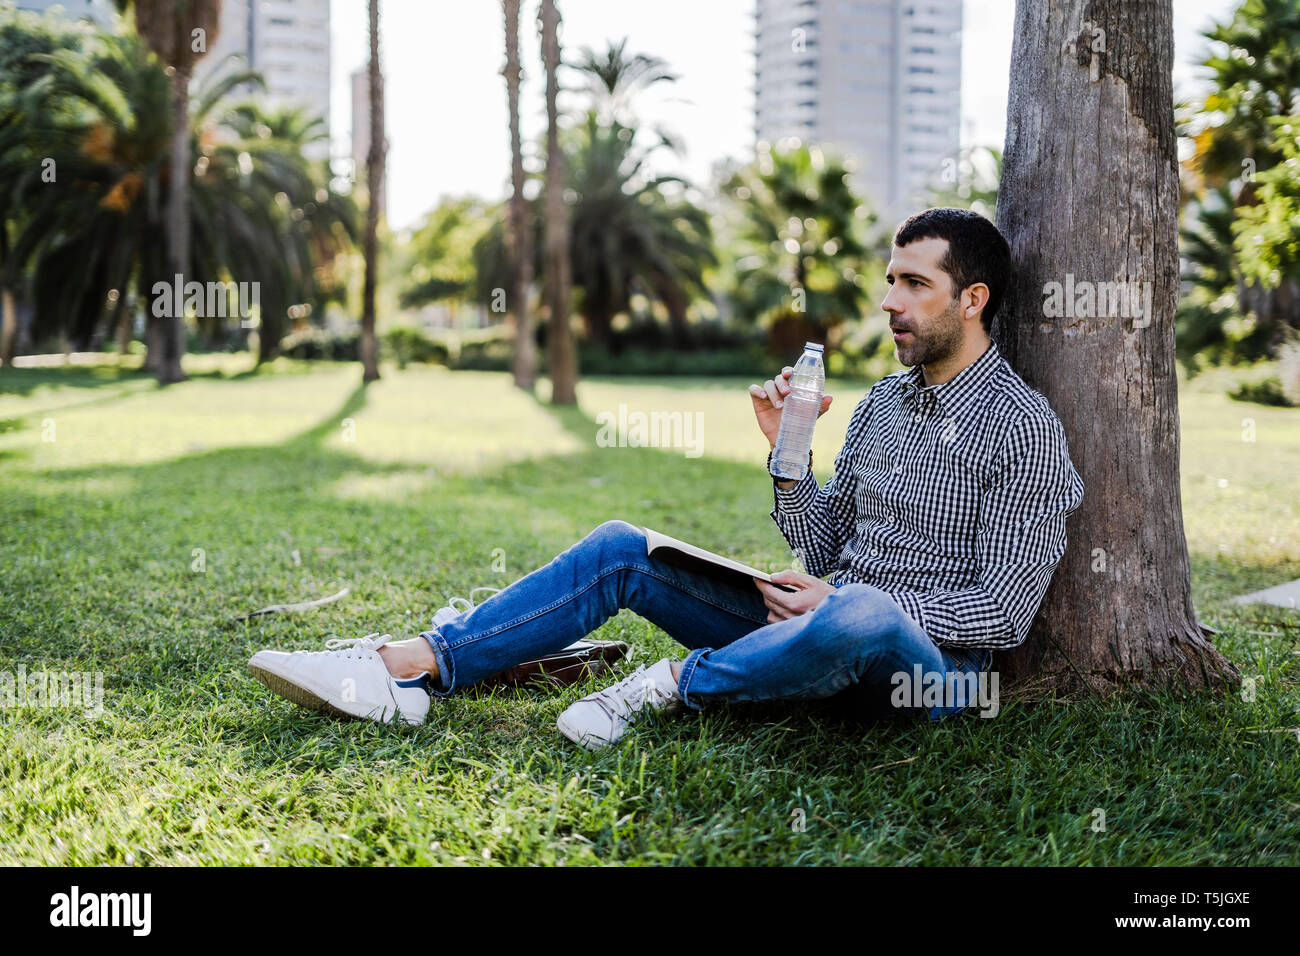 Man on a meadow in city park leaning against tree drinking water Stock Photo